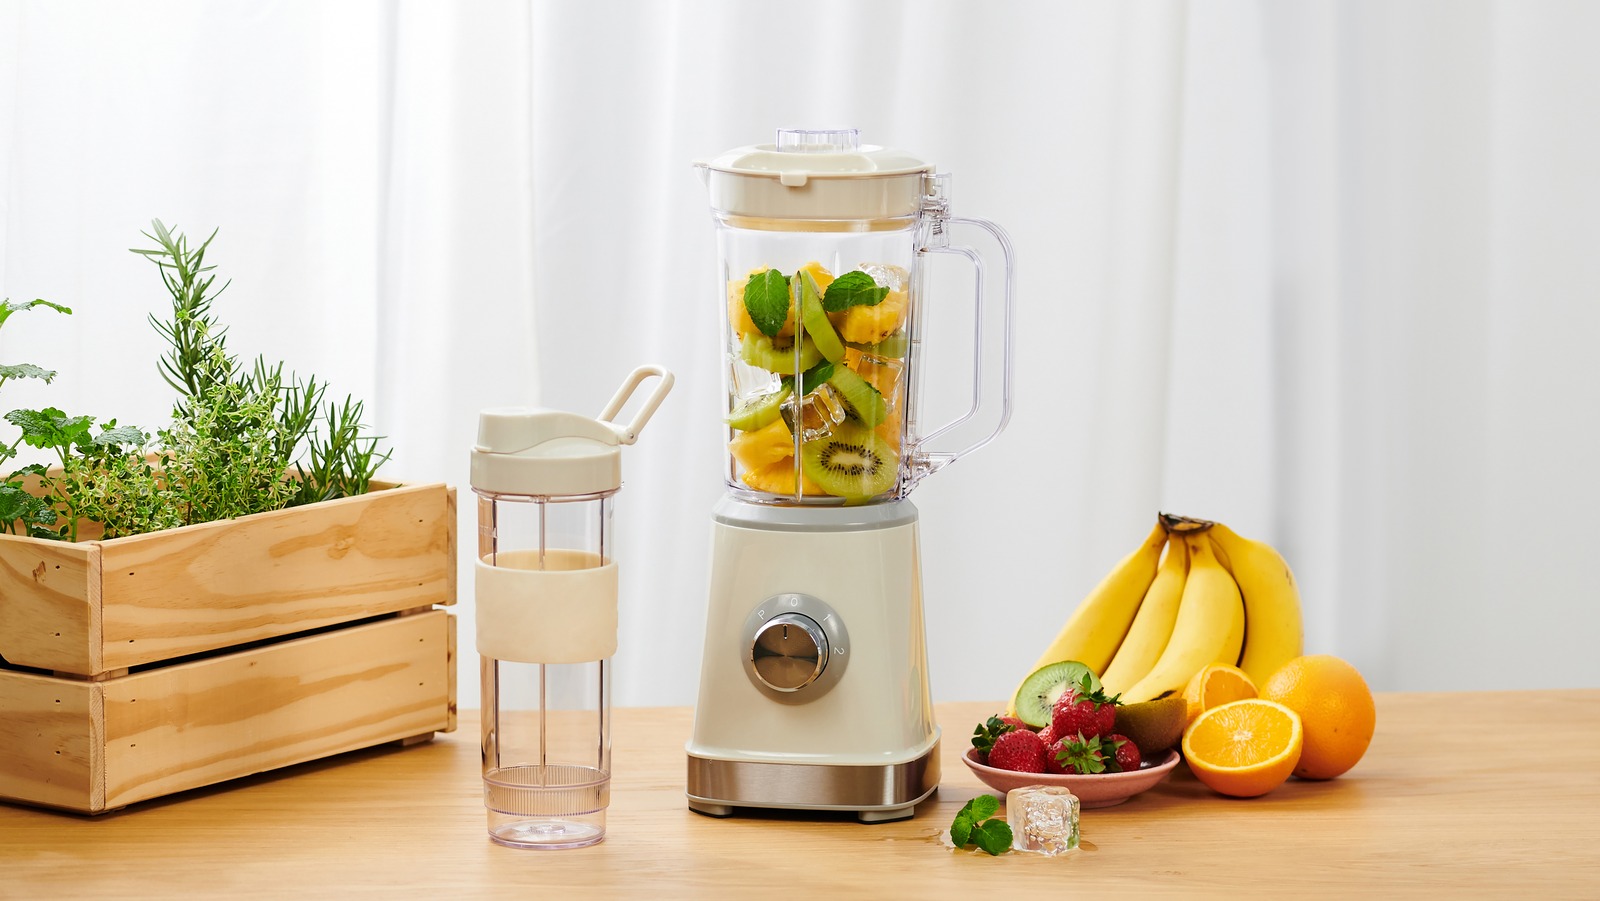 BlendJet, the Internet's Favorite Blender, Has a New Attachment To